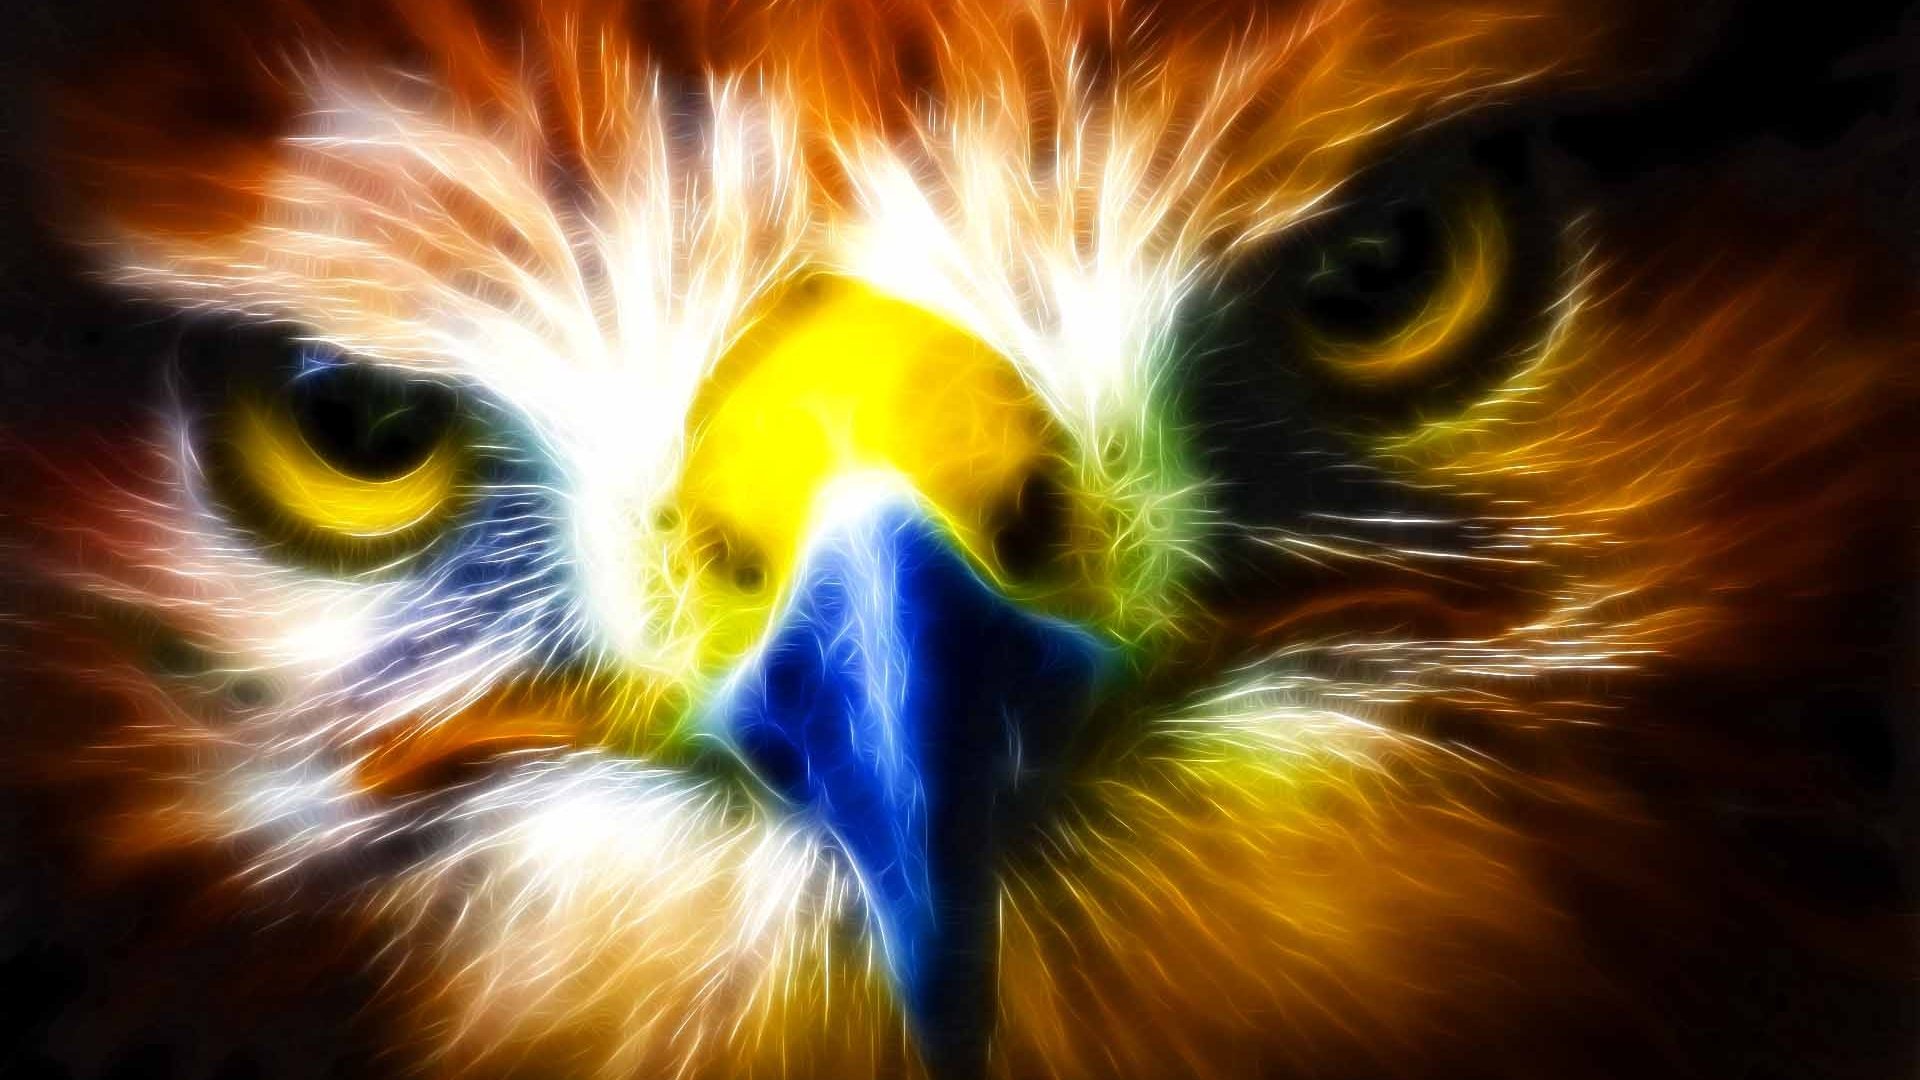  Eagle  HD  Wallpaper  Background Image 1920x1080 ID 